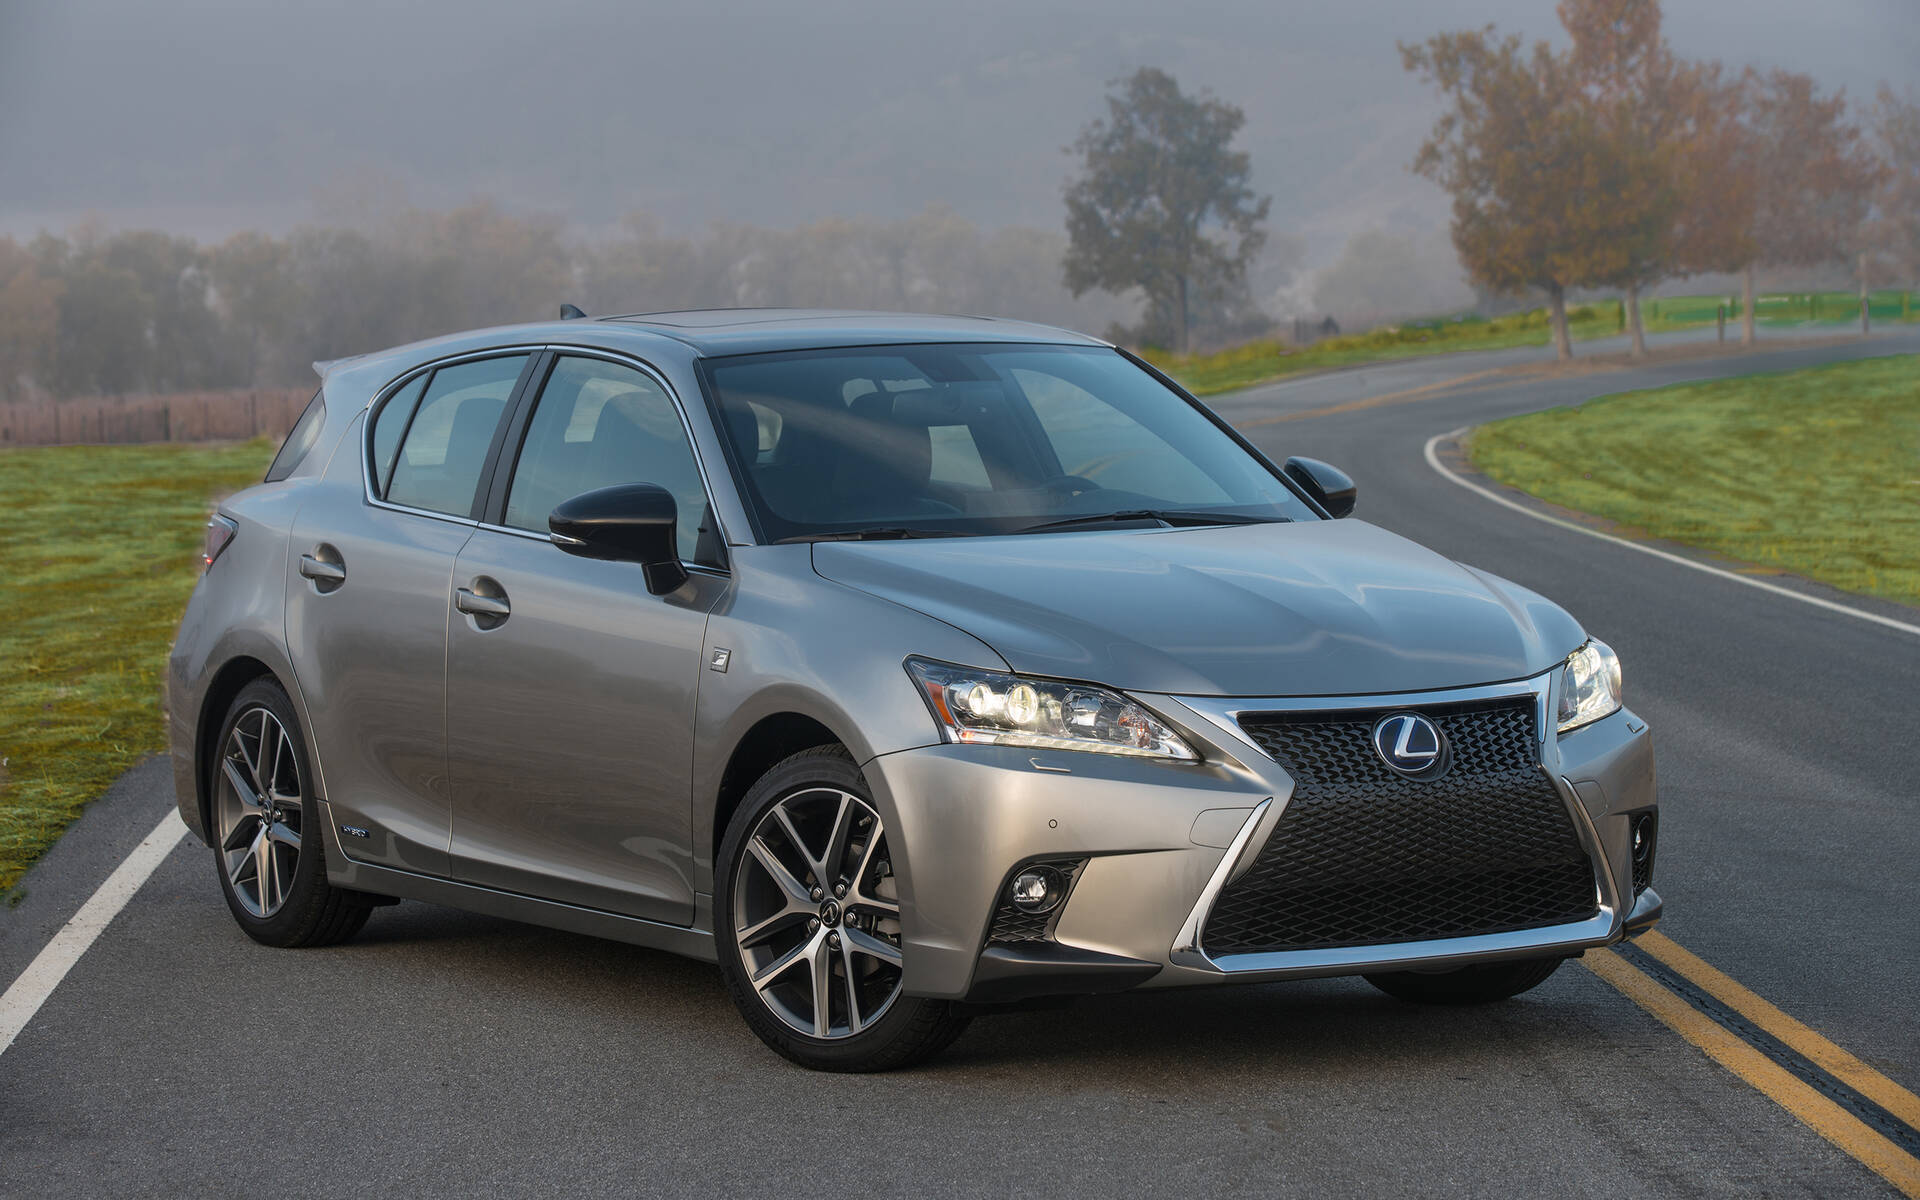 Lexus CT 200h : an Interesting Pre-Owned Hybrid - The Car Guide